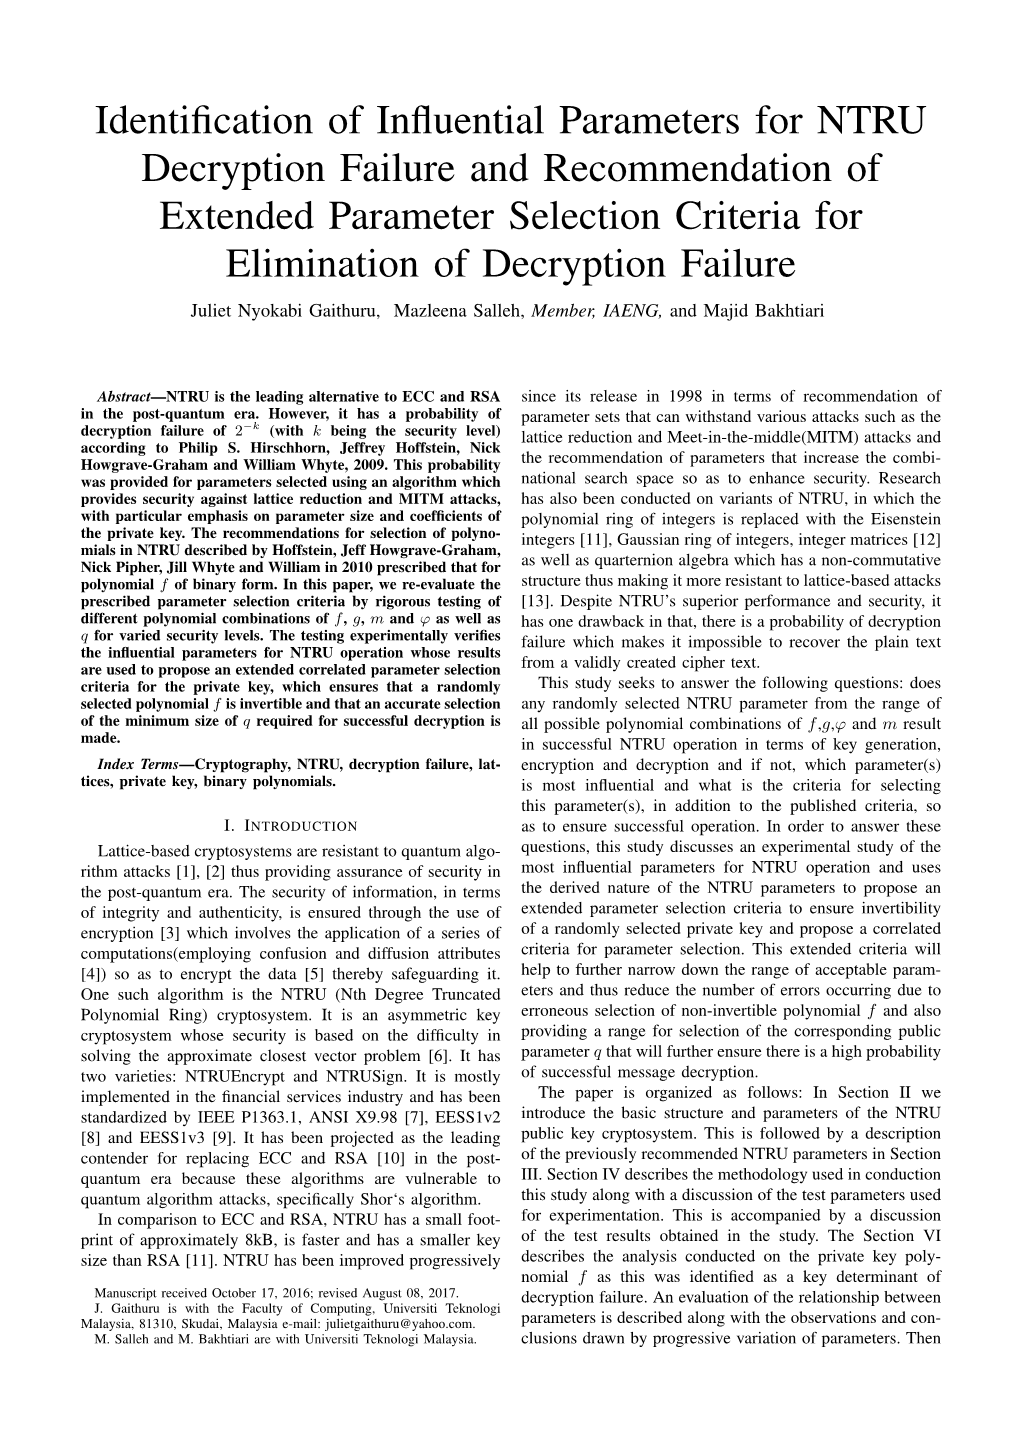 Identification of Influential Parameters for NTRU Decryption Failure And